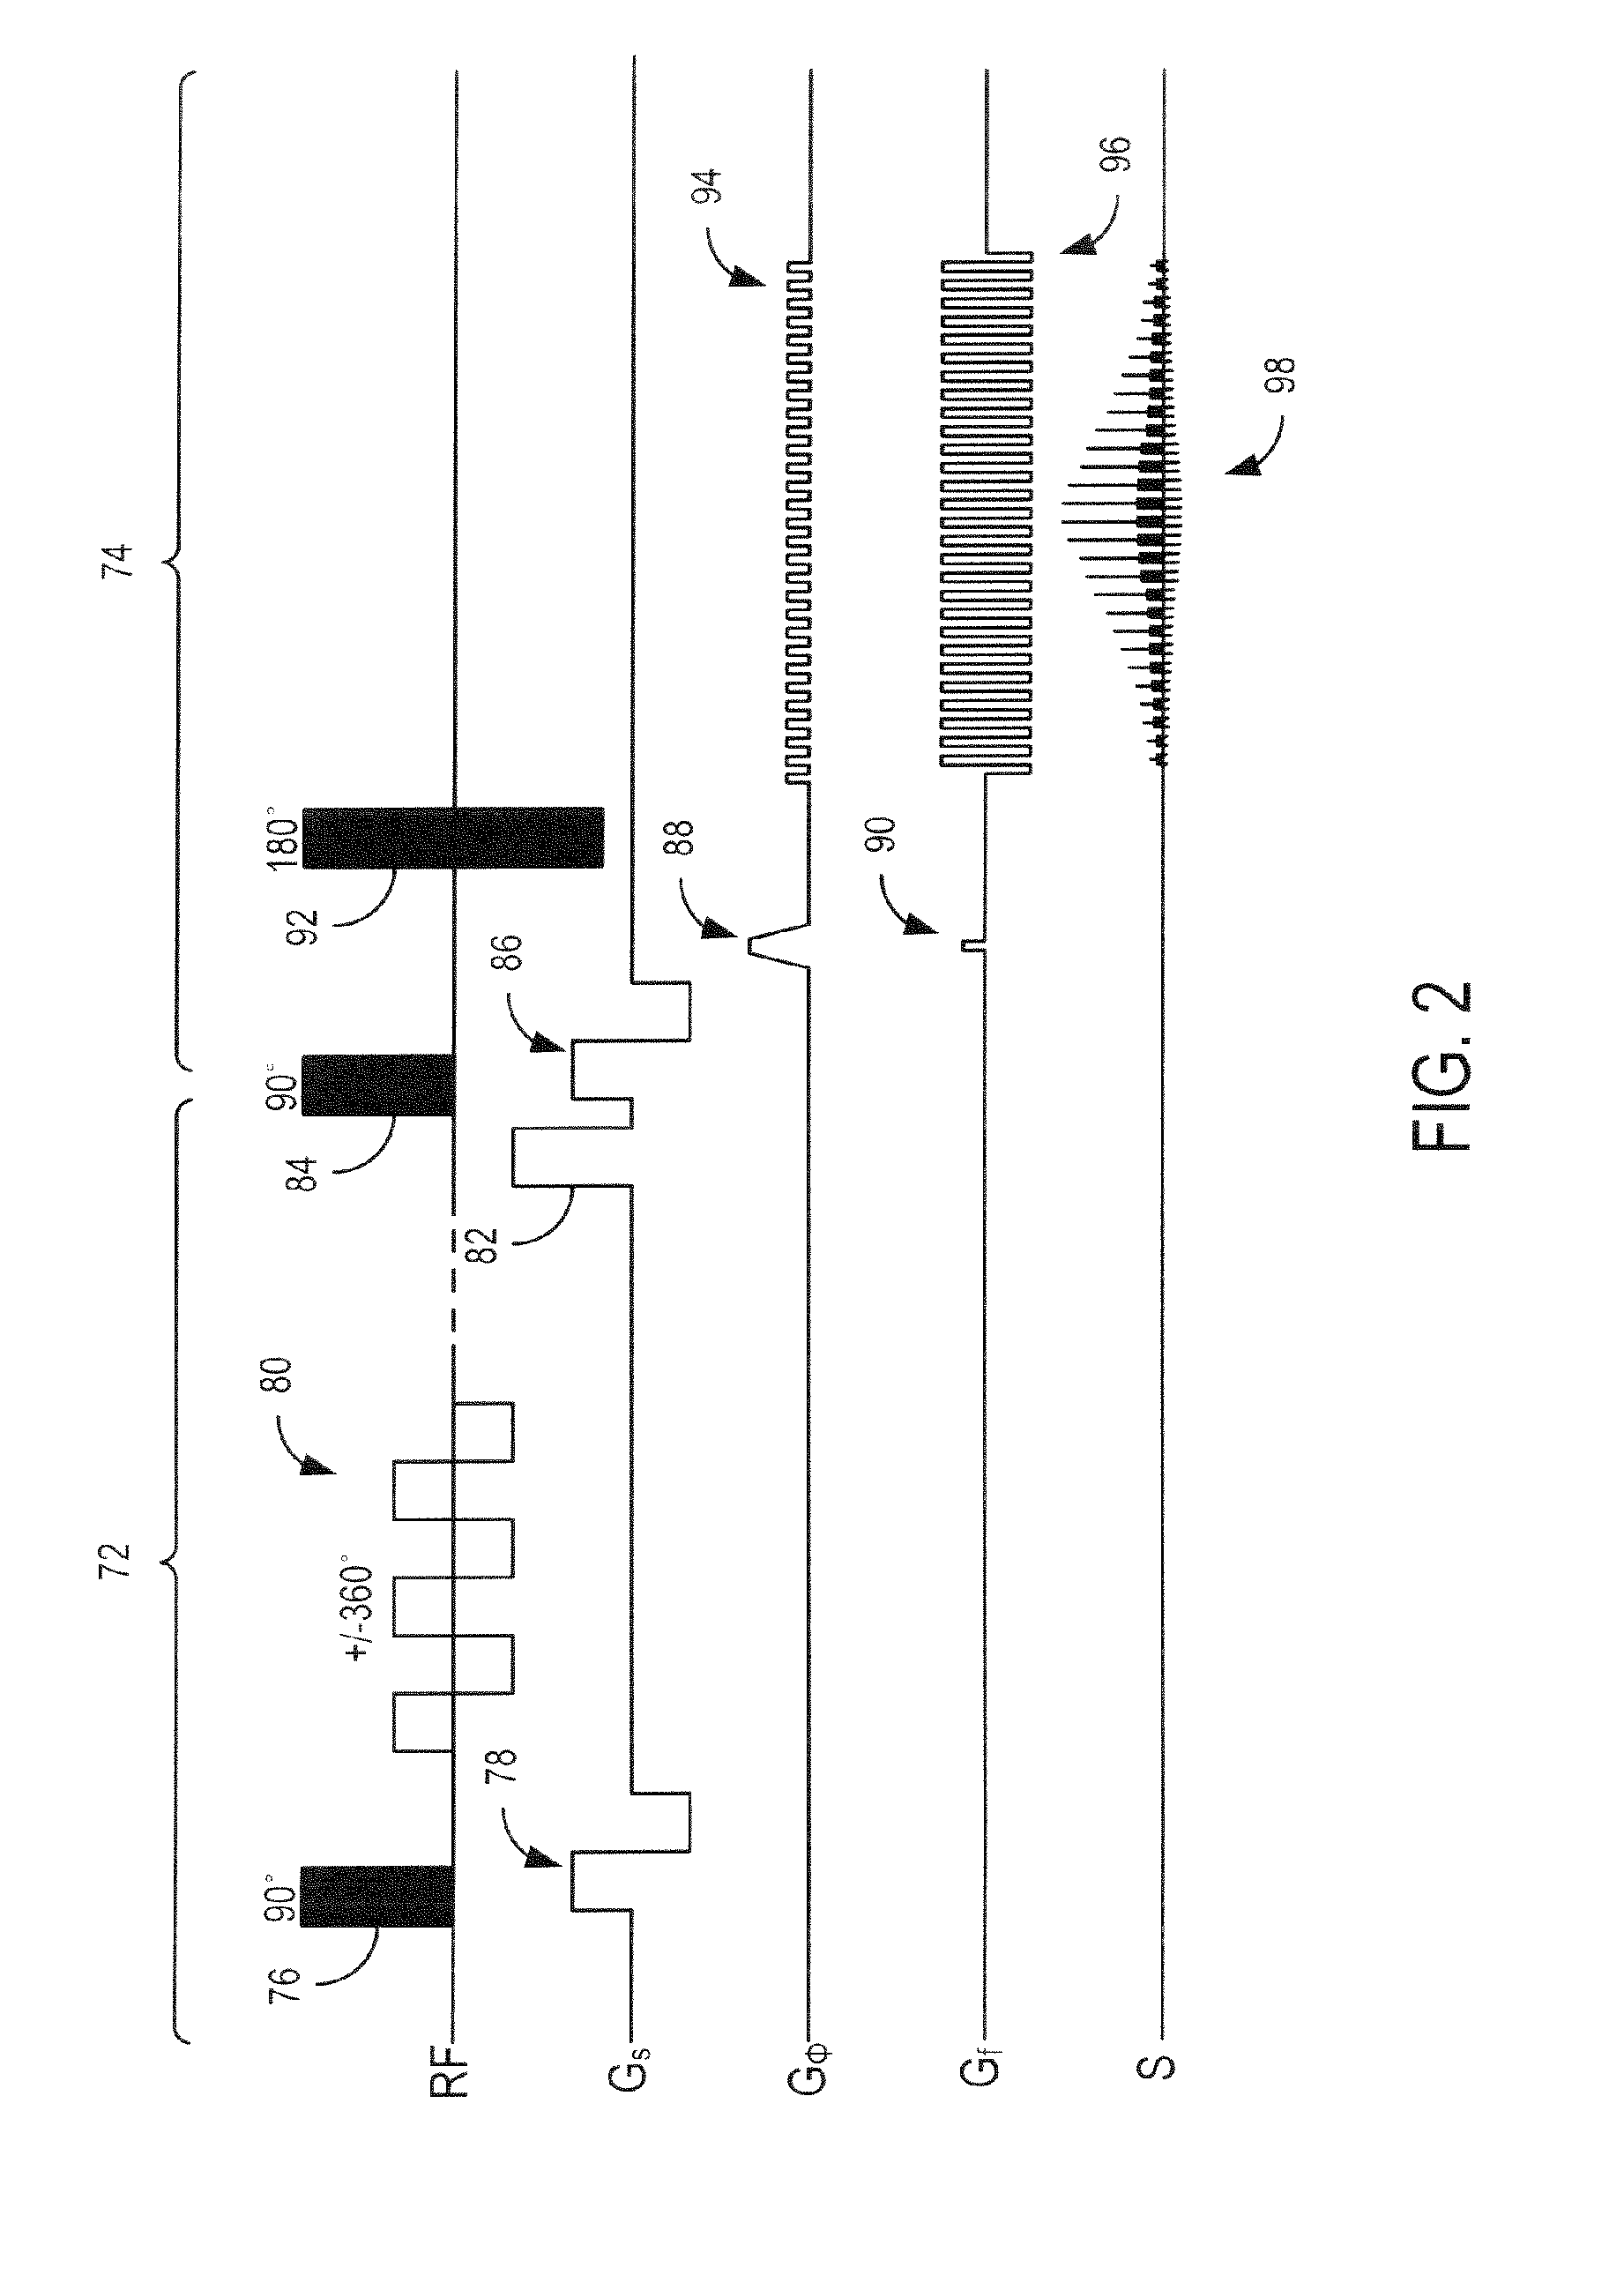 Method and apparatus of background suppression in MR imaging using spin locking